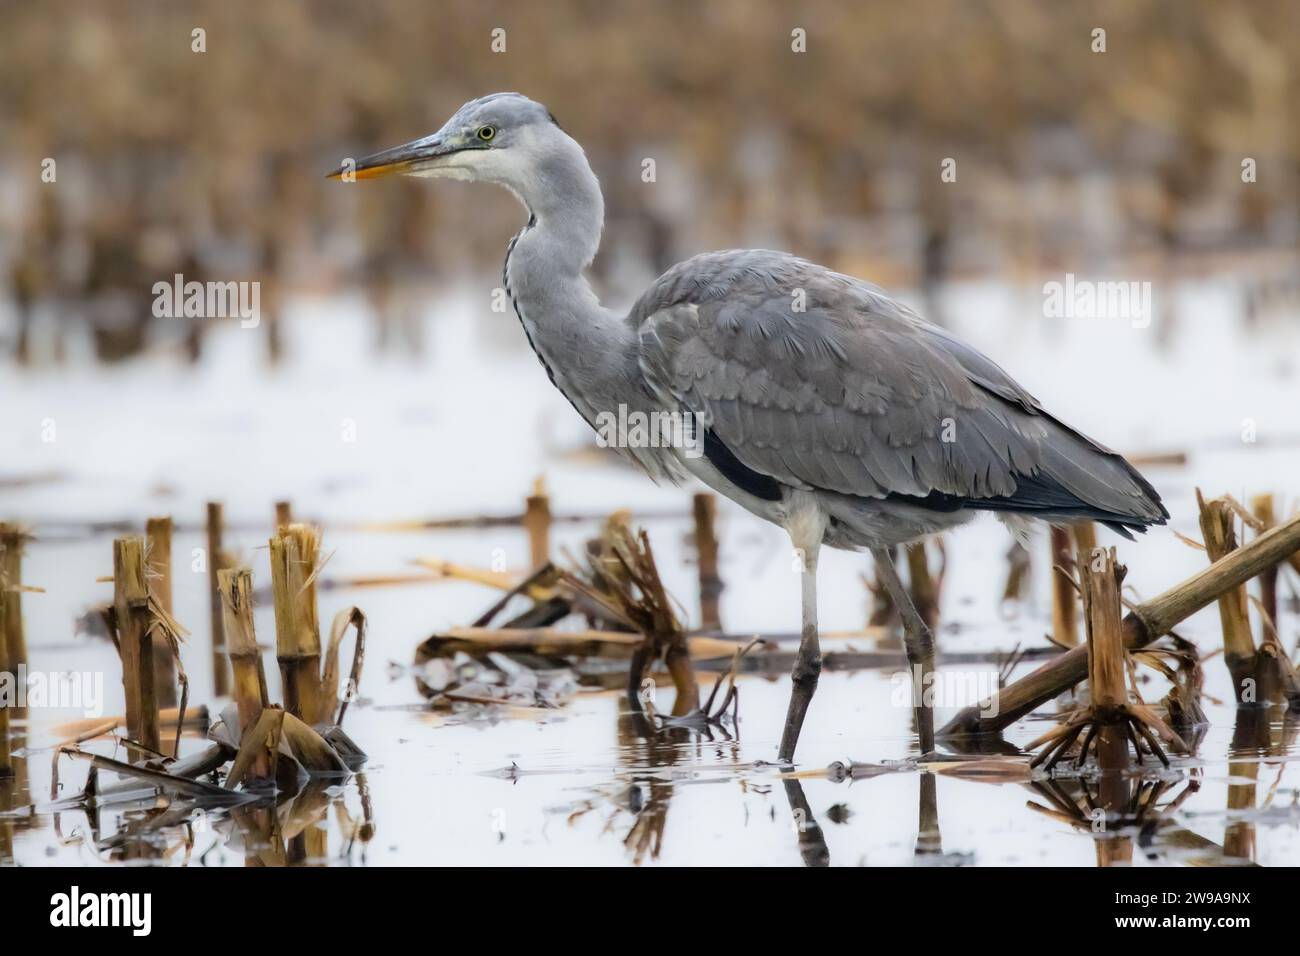 A closeup of a gray heron standing in a pond Stock Photo